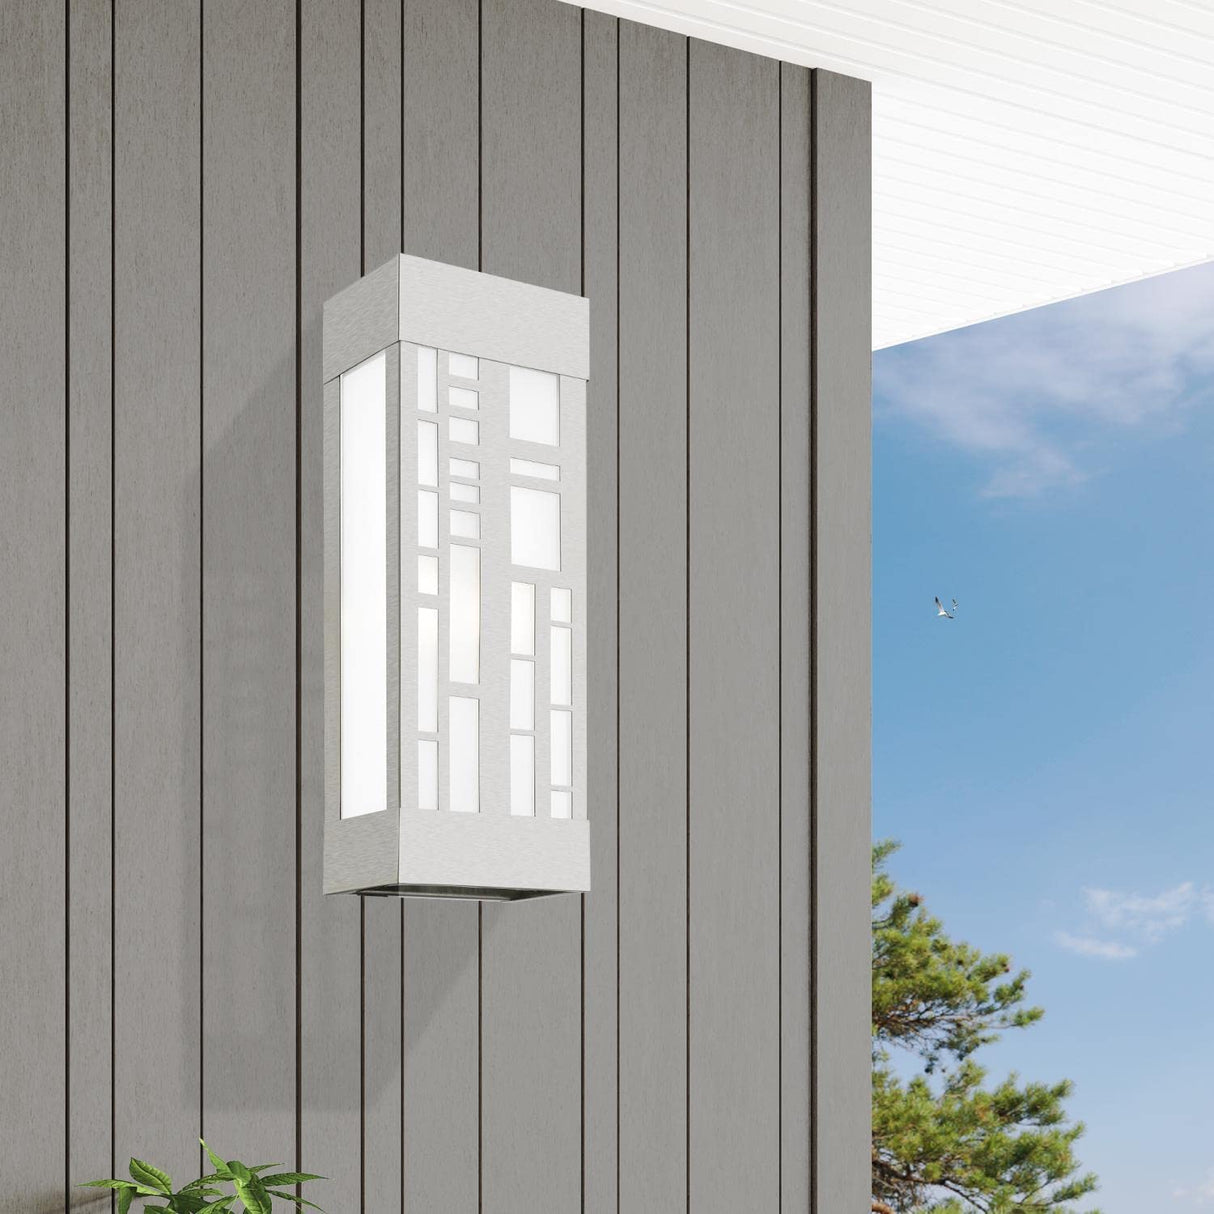 Livex Lighting 22972-91 Malmo - 2 Light Outdoor ADA Wall Sconce in Modern Style-17 Inches Tall and 6 Inches Wide, Finish Color: Brushed Nickel